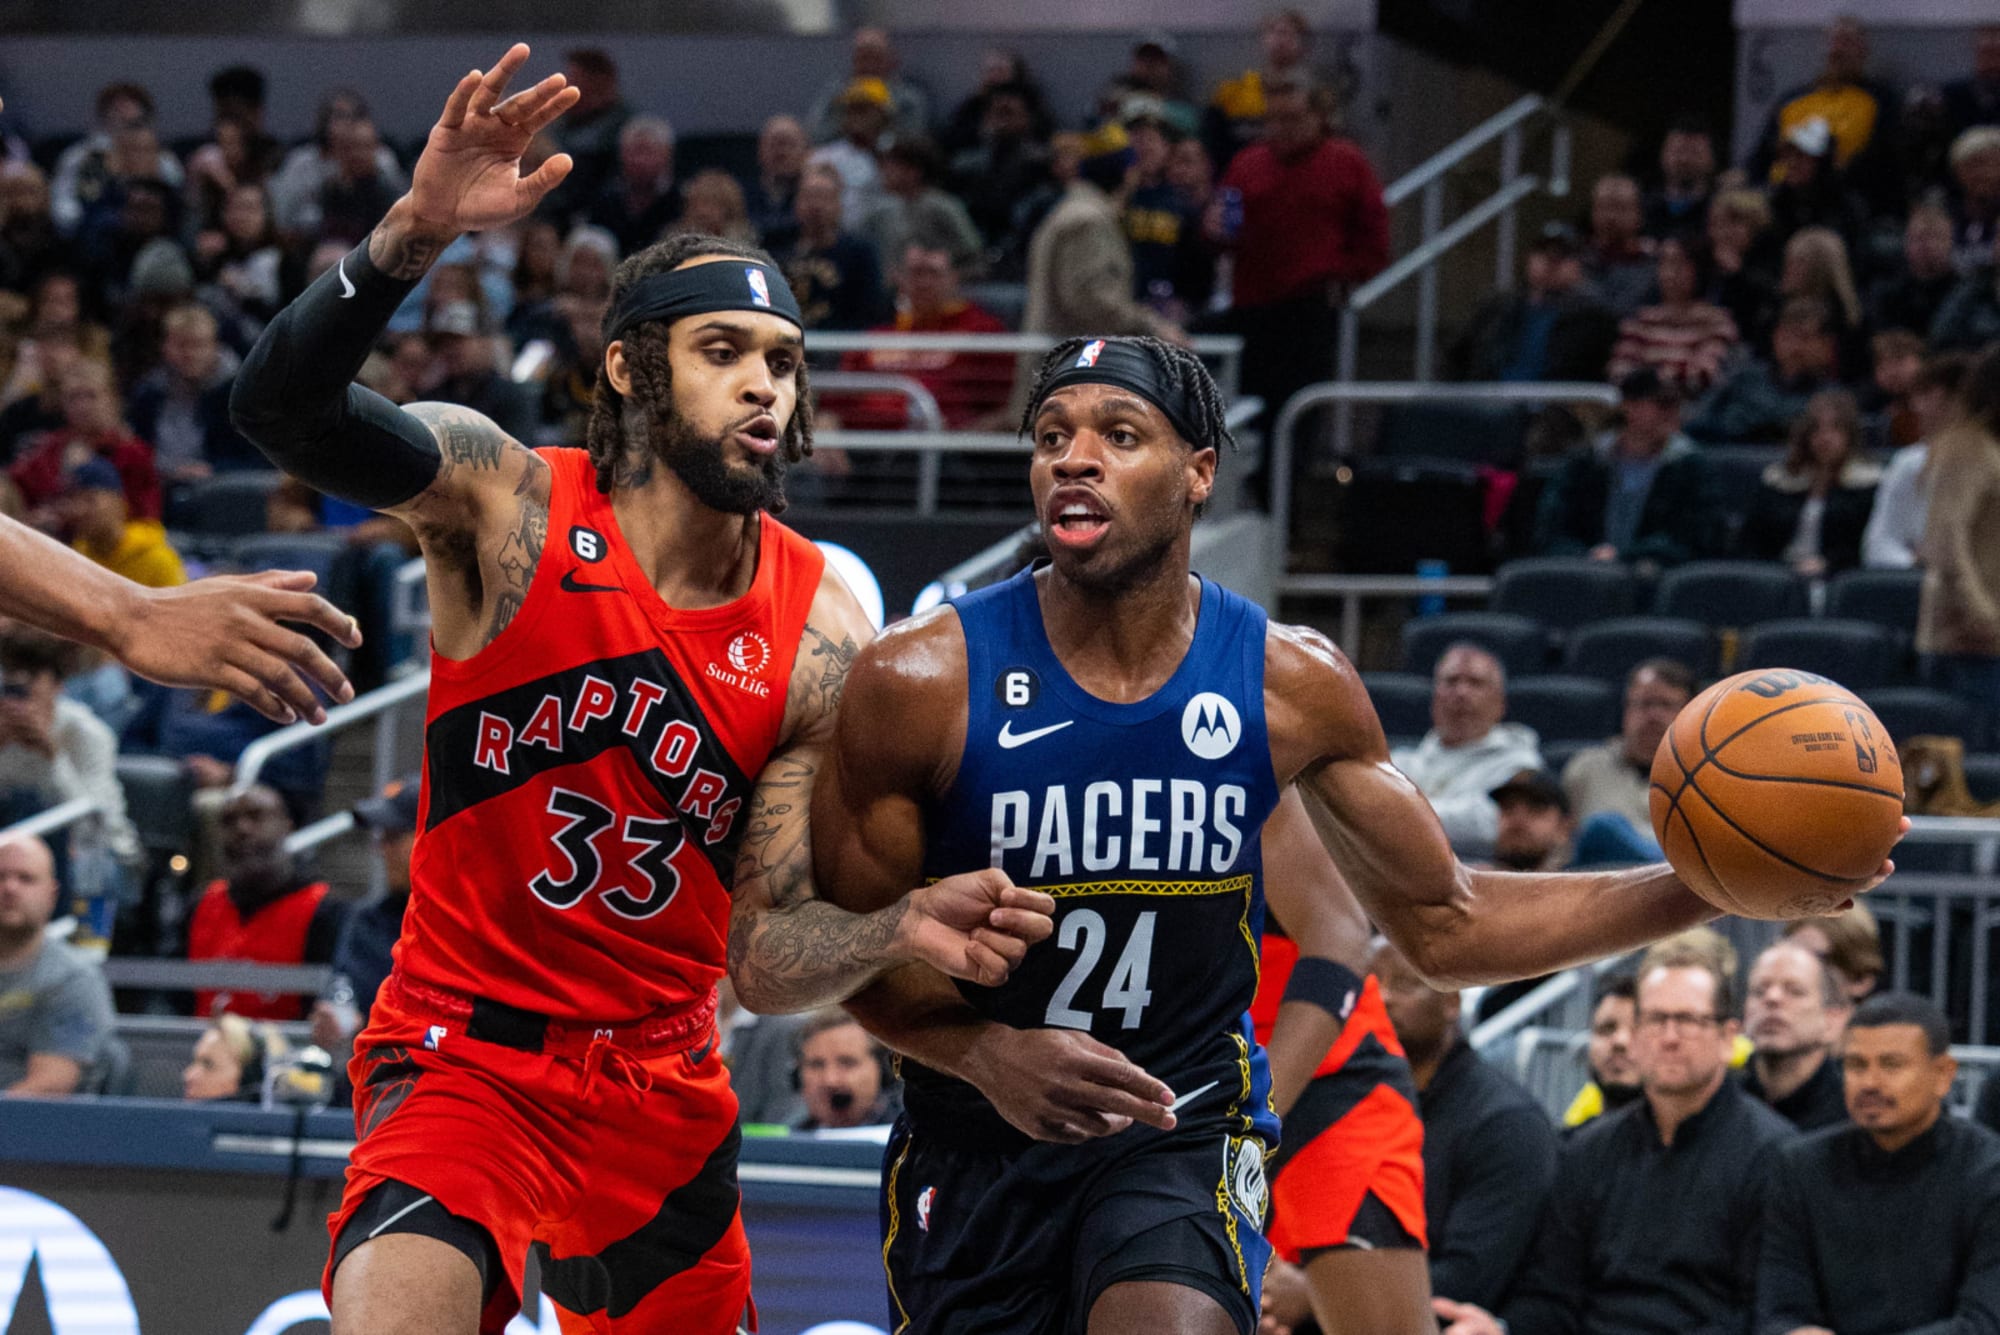 This Raptors-Pacers trade swaps OG Anunoby and Buddy Hield